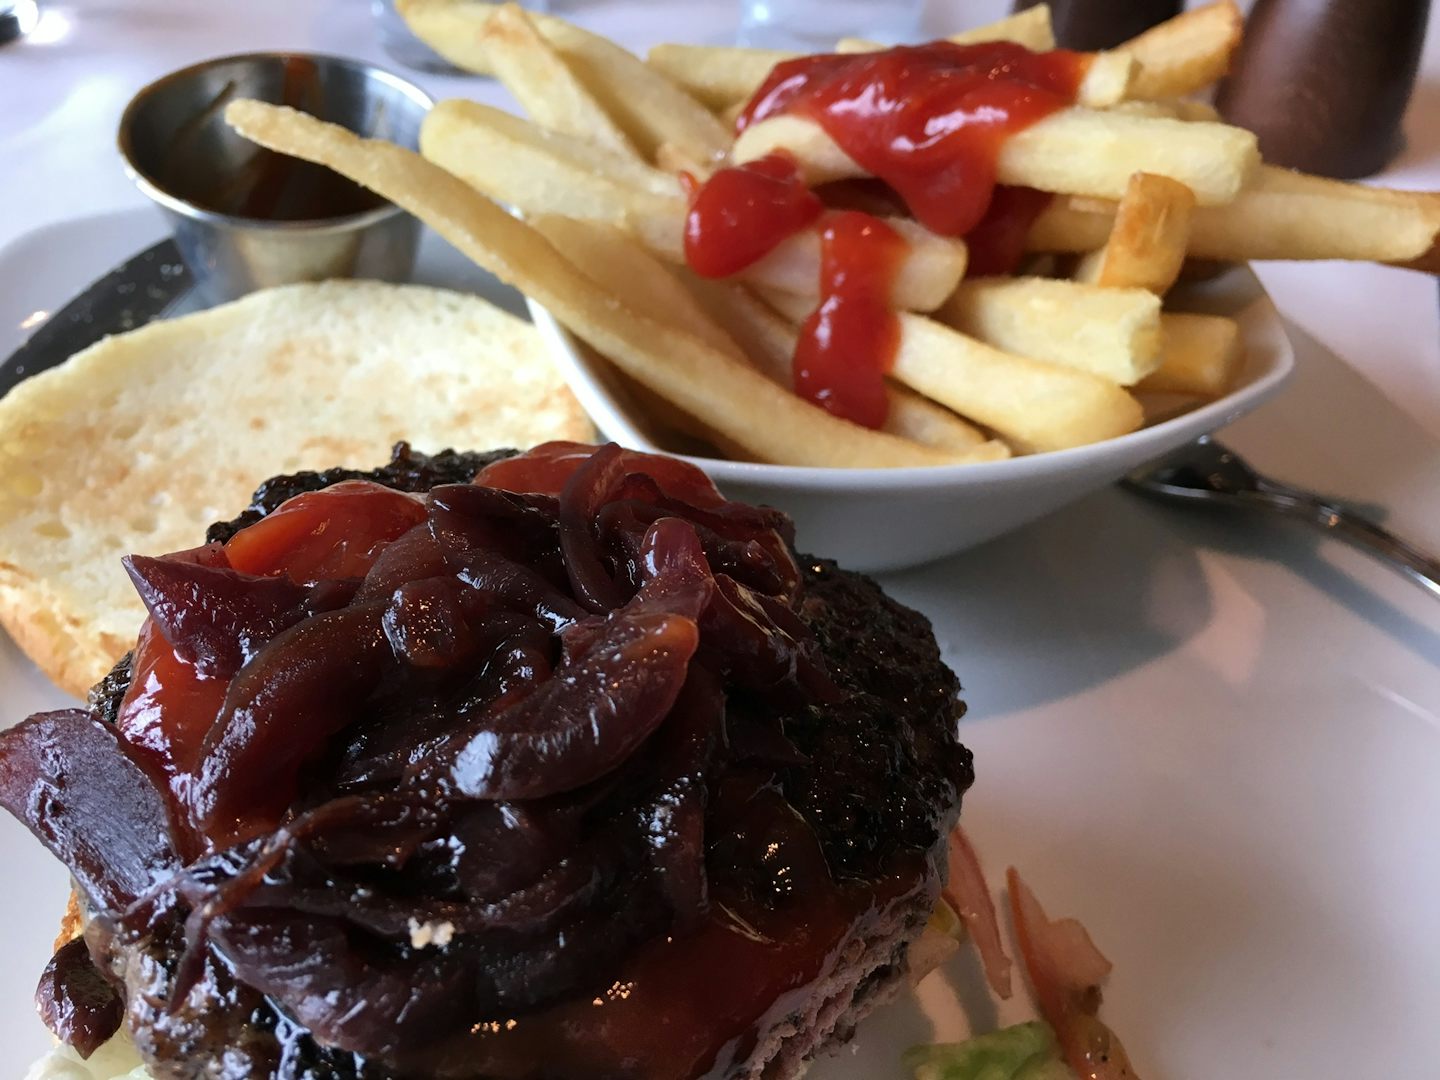 Gluten free, dairy free burger and fries at Cagney's